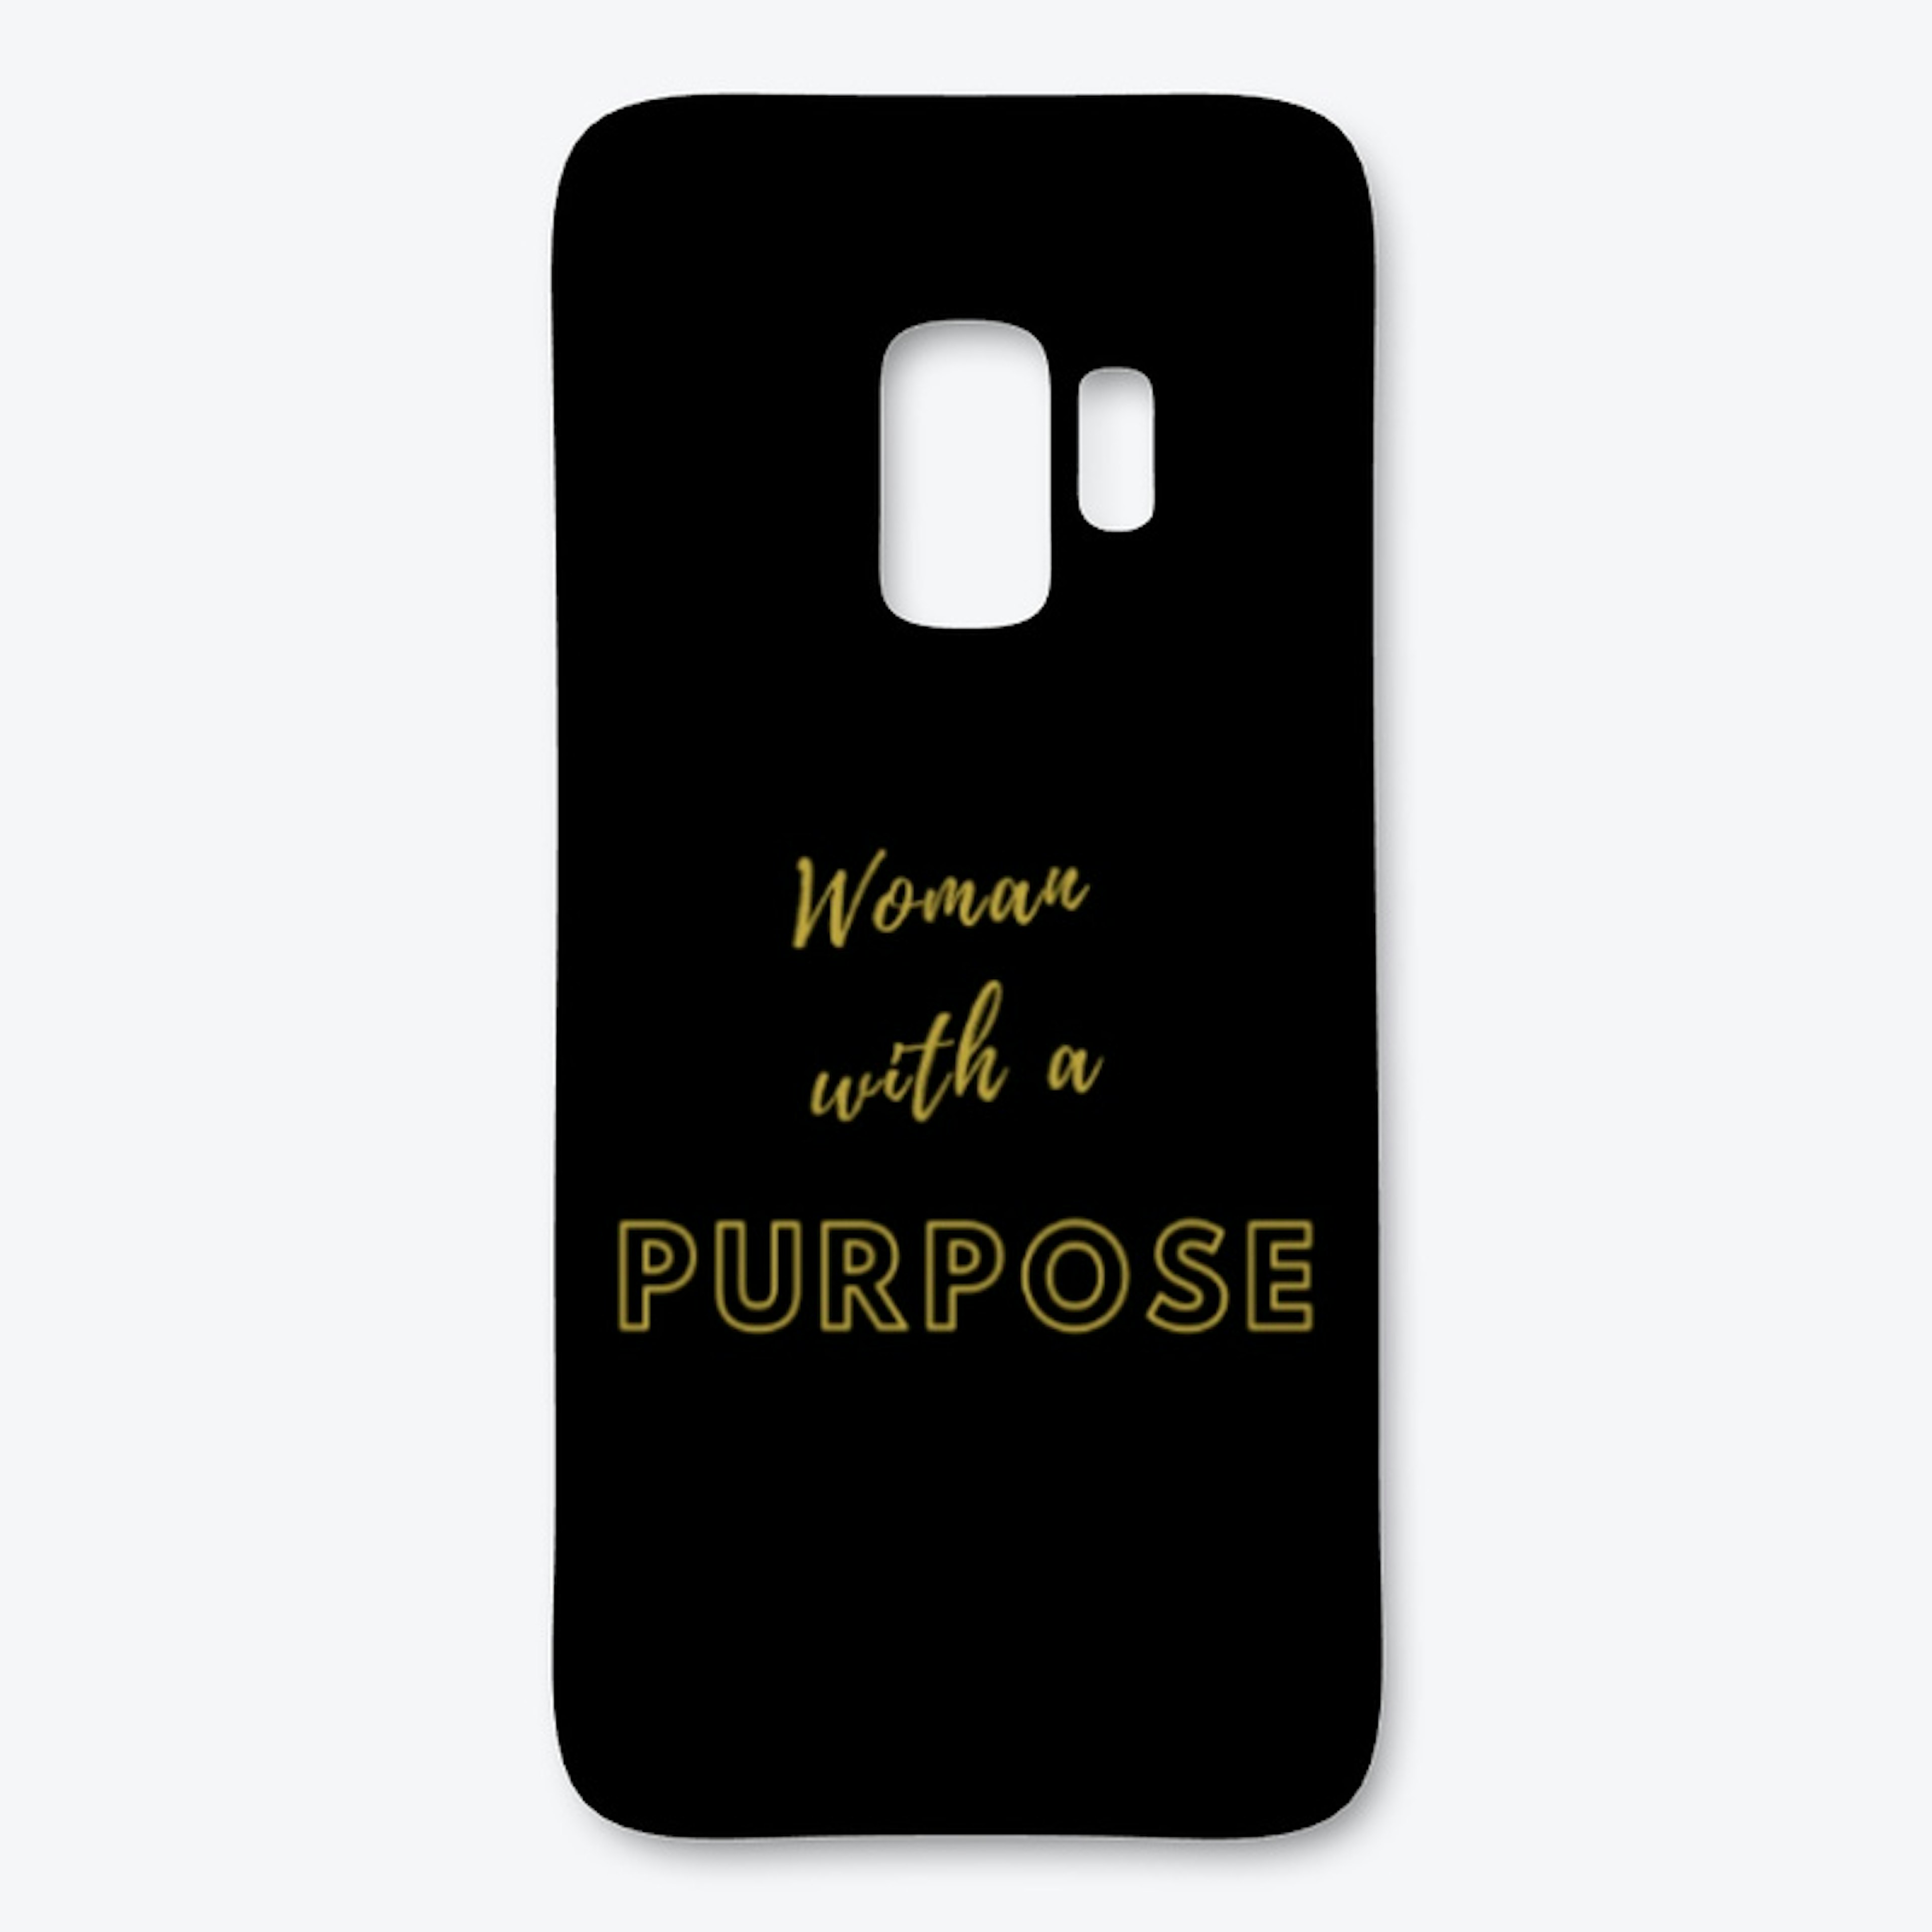 Woman with a Purpose